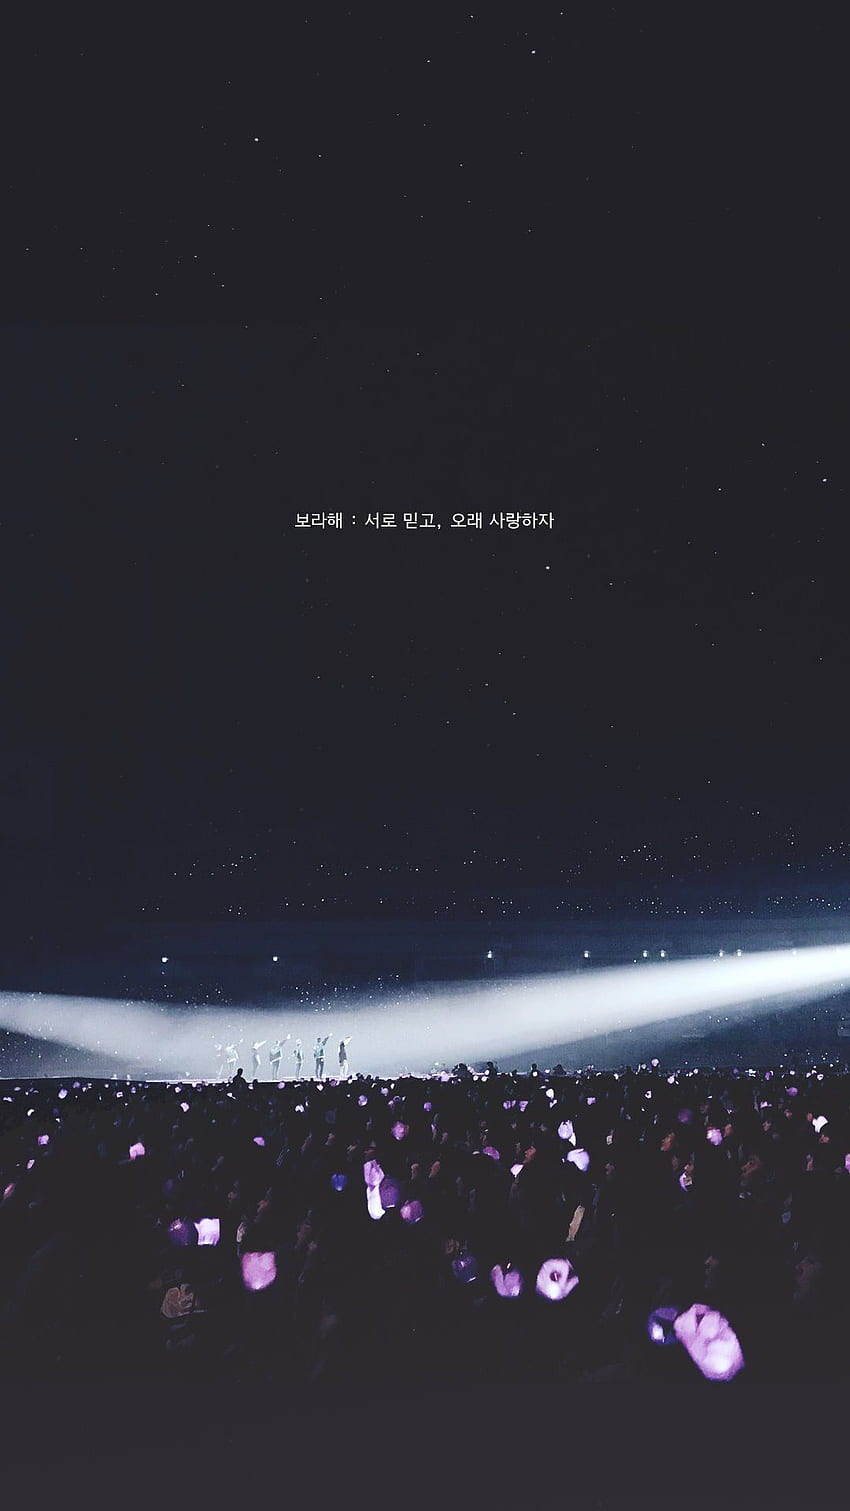 A poster with the words we are one - BTS